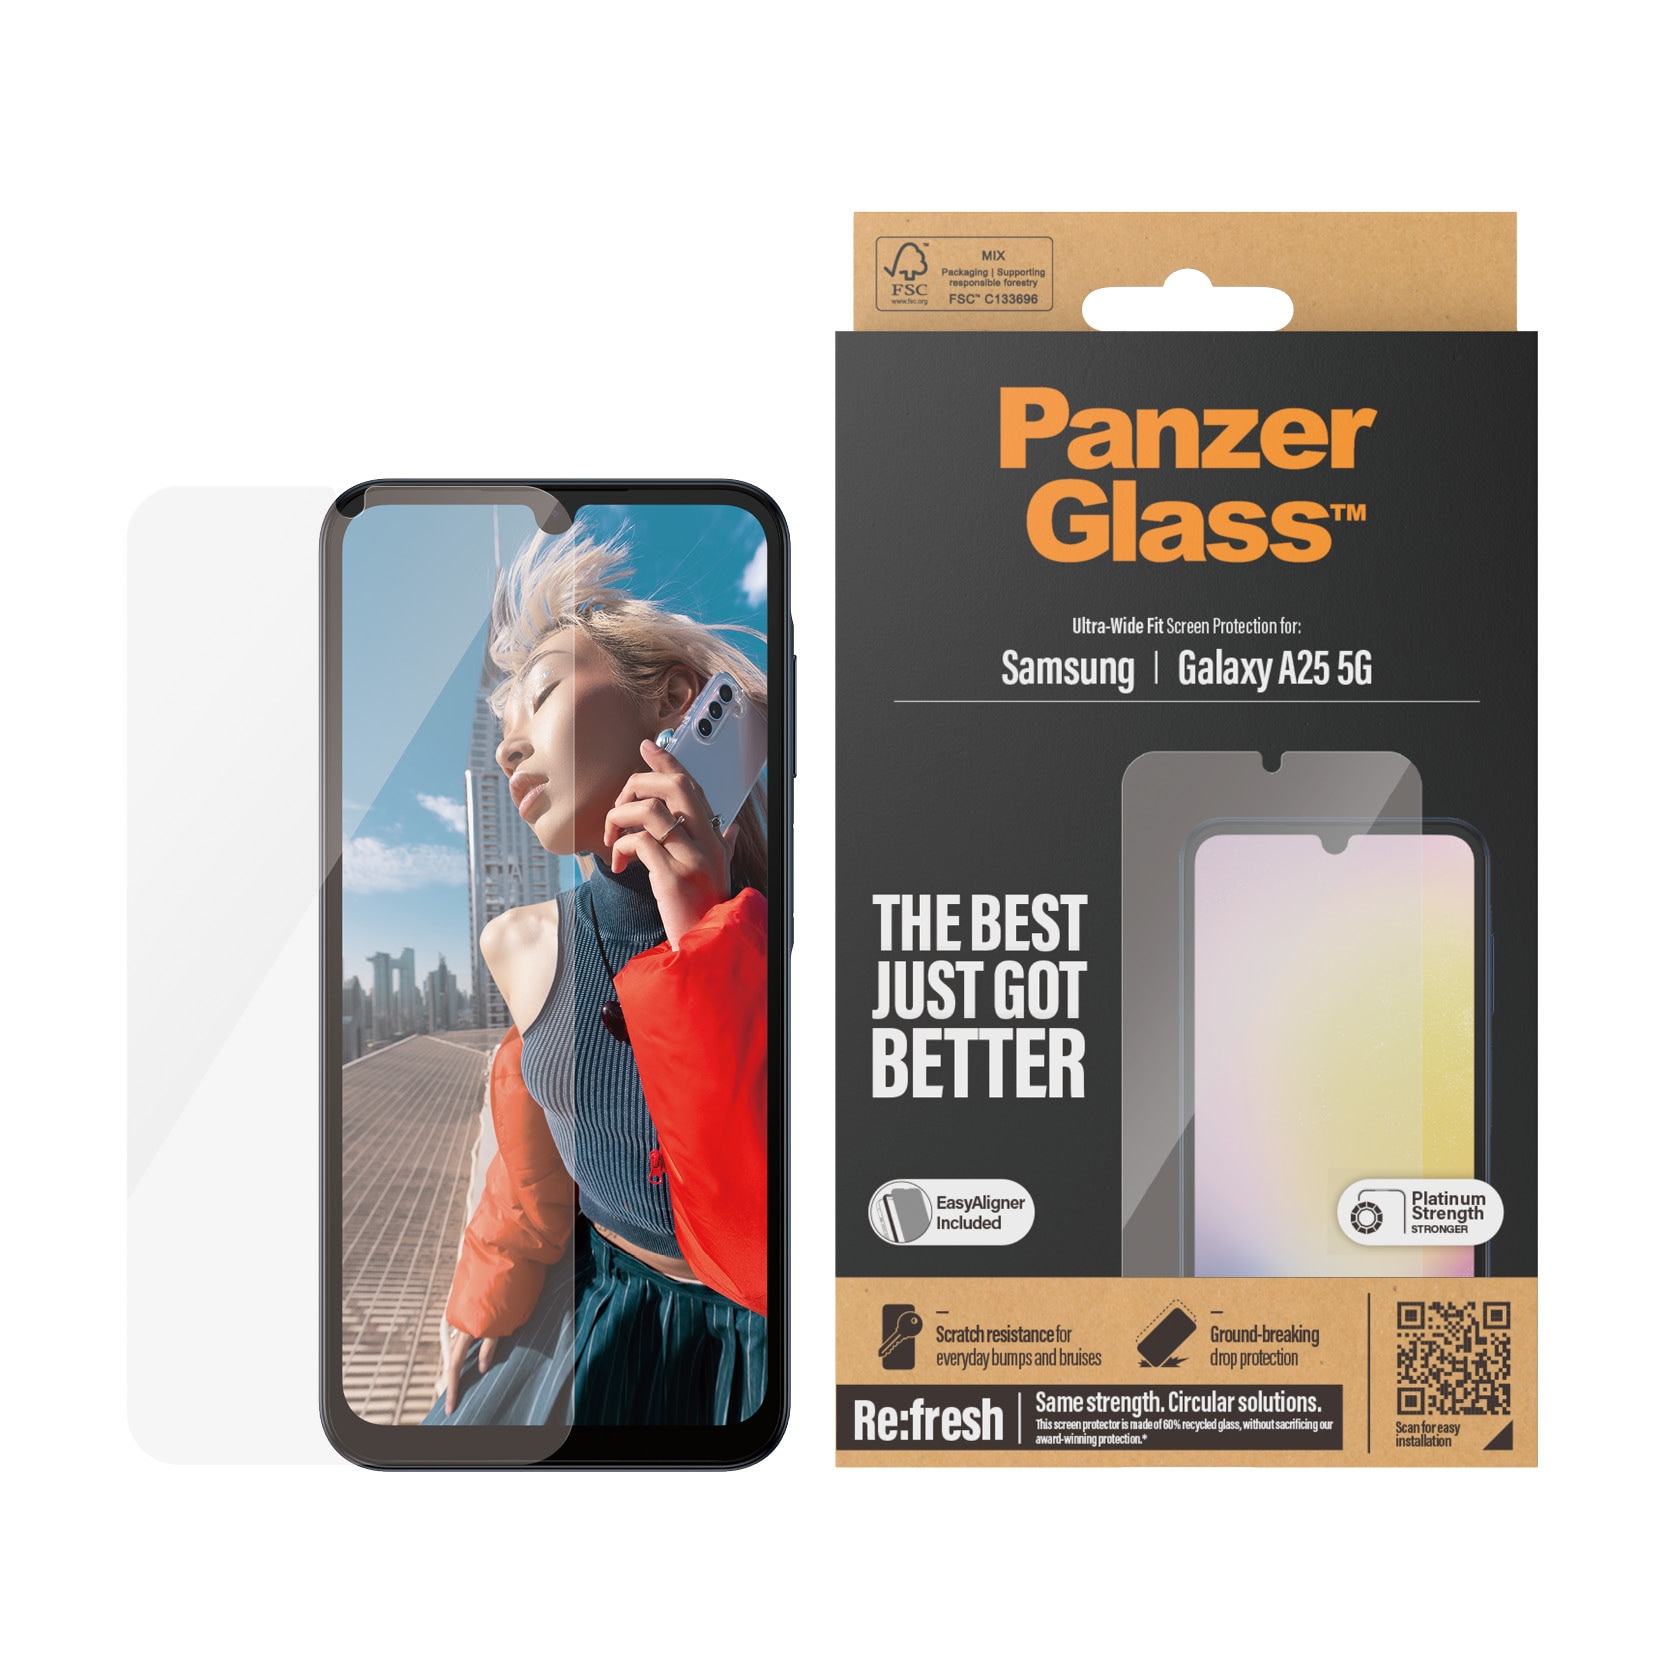 Samsung Galaxy A25 Screen Protector (with EasyAligner) Ultra Wide Fit